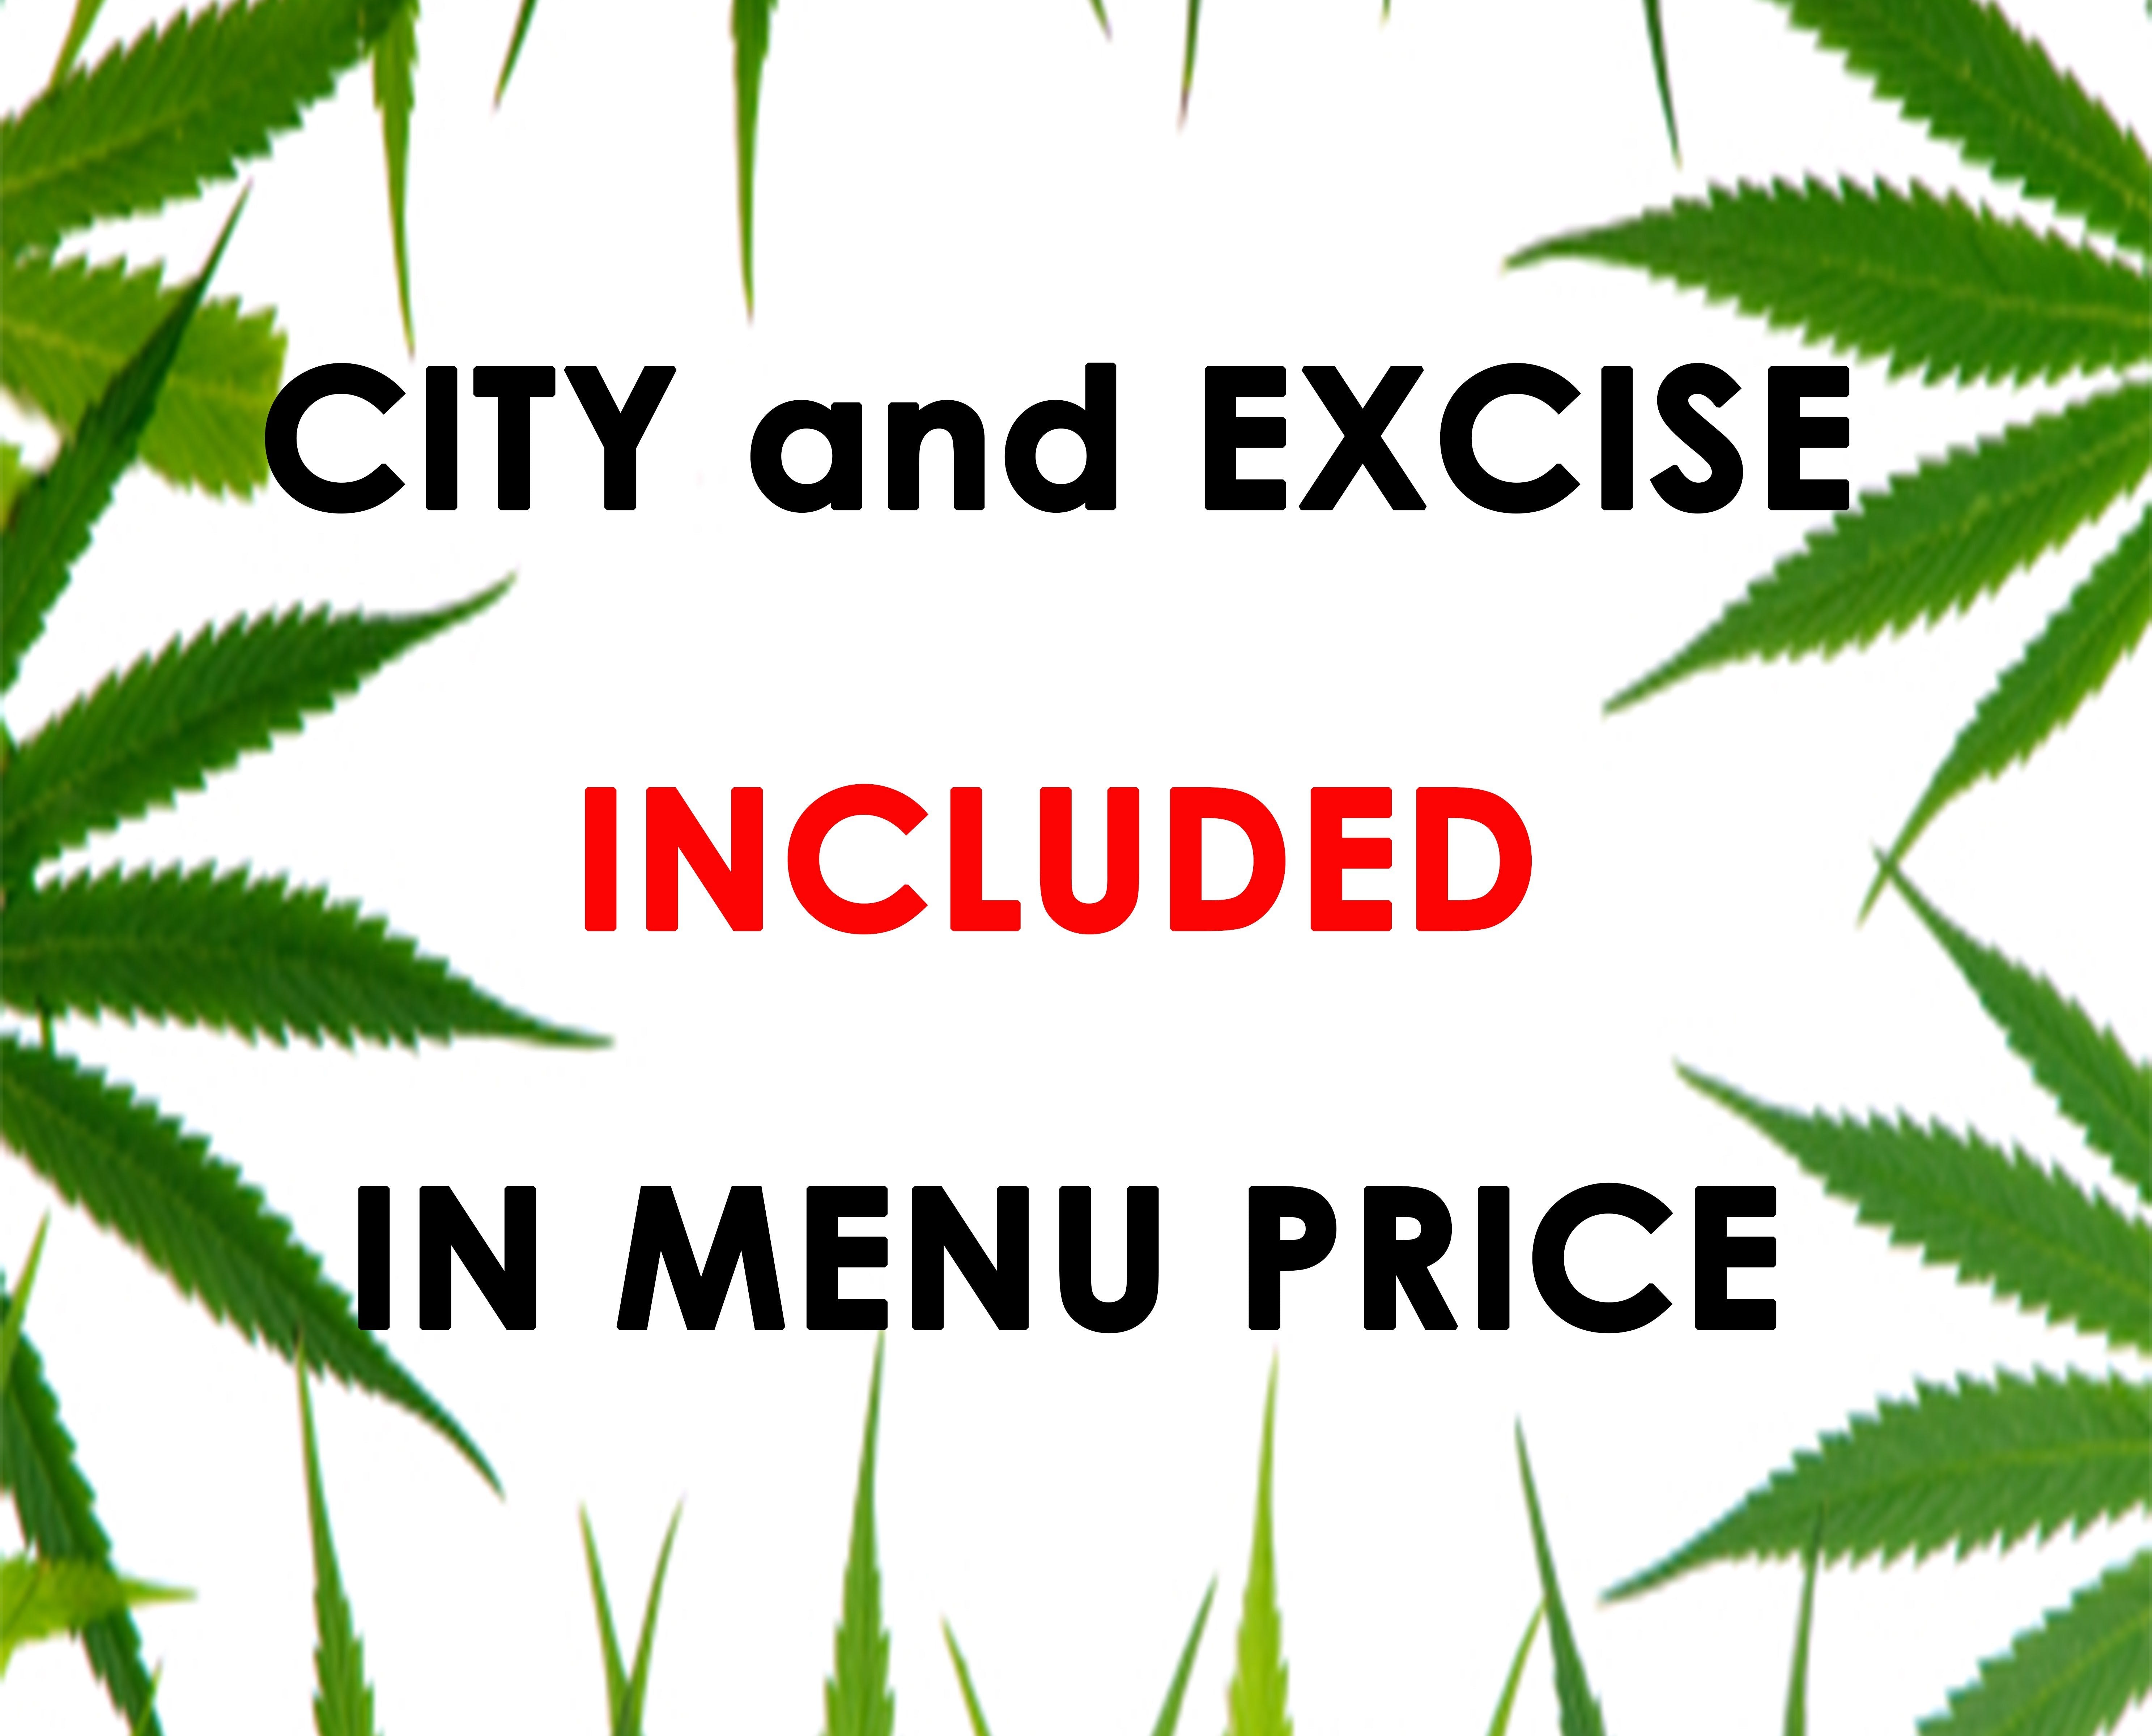 hybrid-city-a-excise-tax-included-in-price